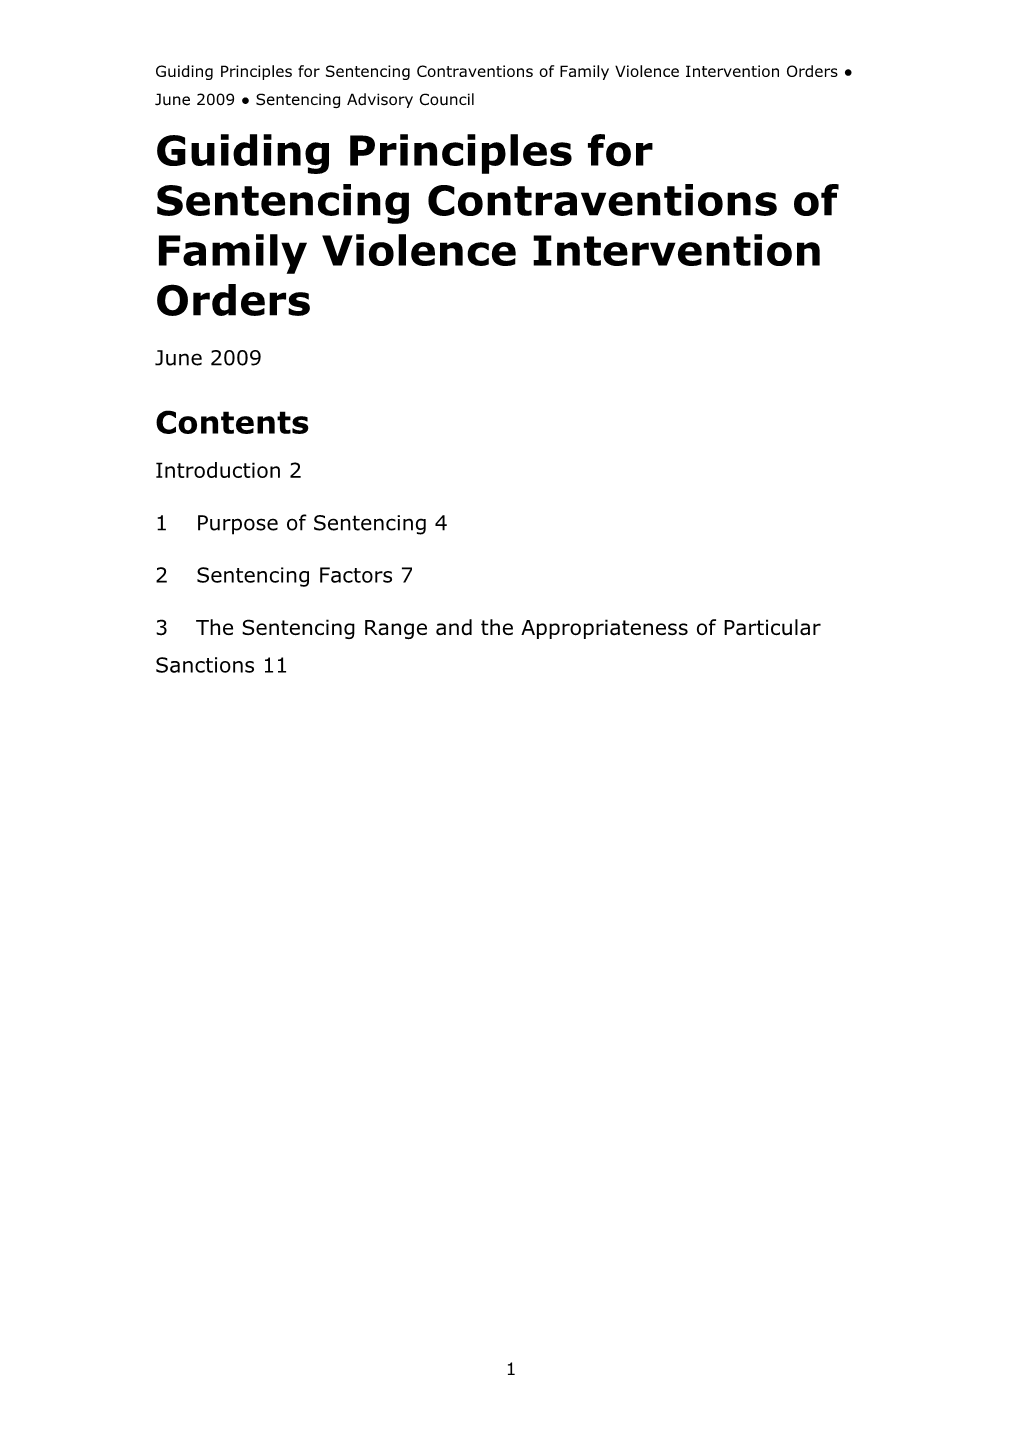 Guiding Principles for Sentencing Contraventions of Family Violence Intervention Orders